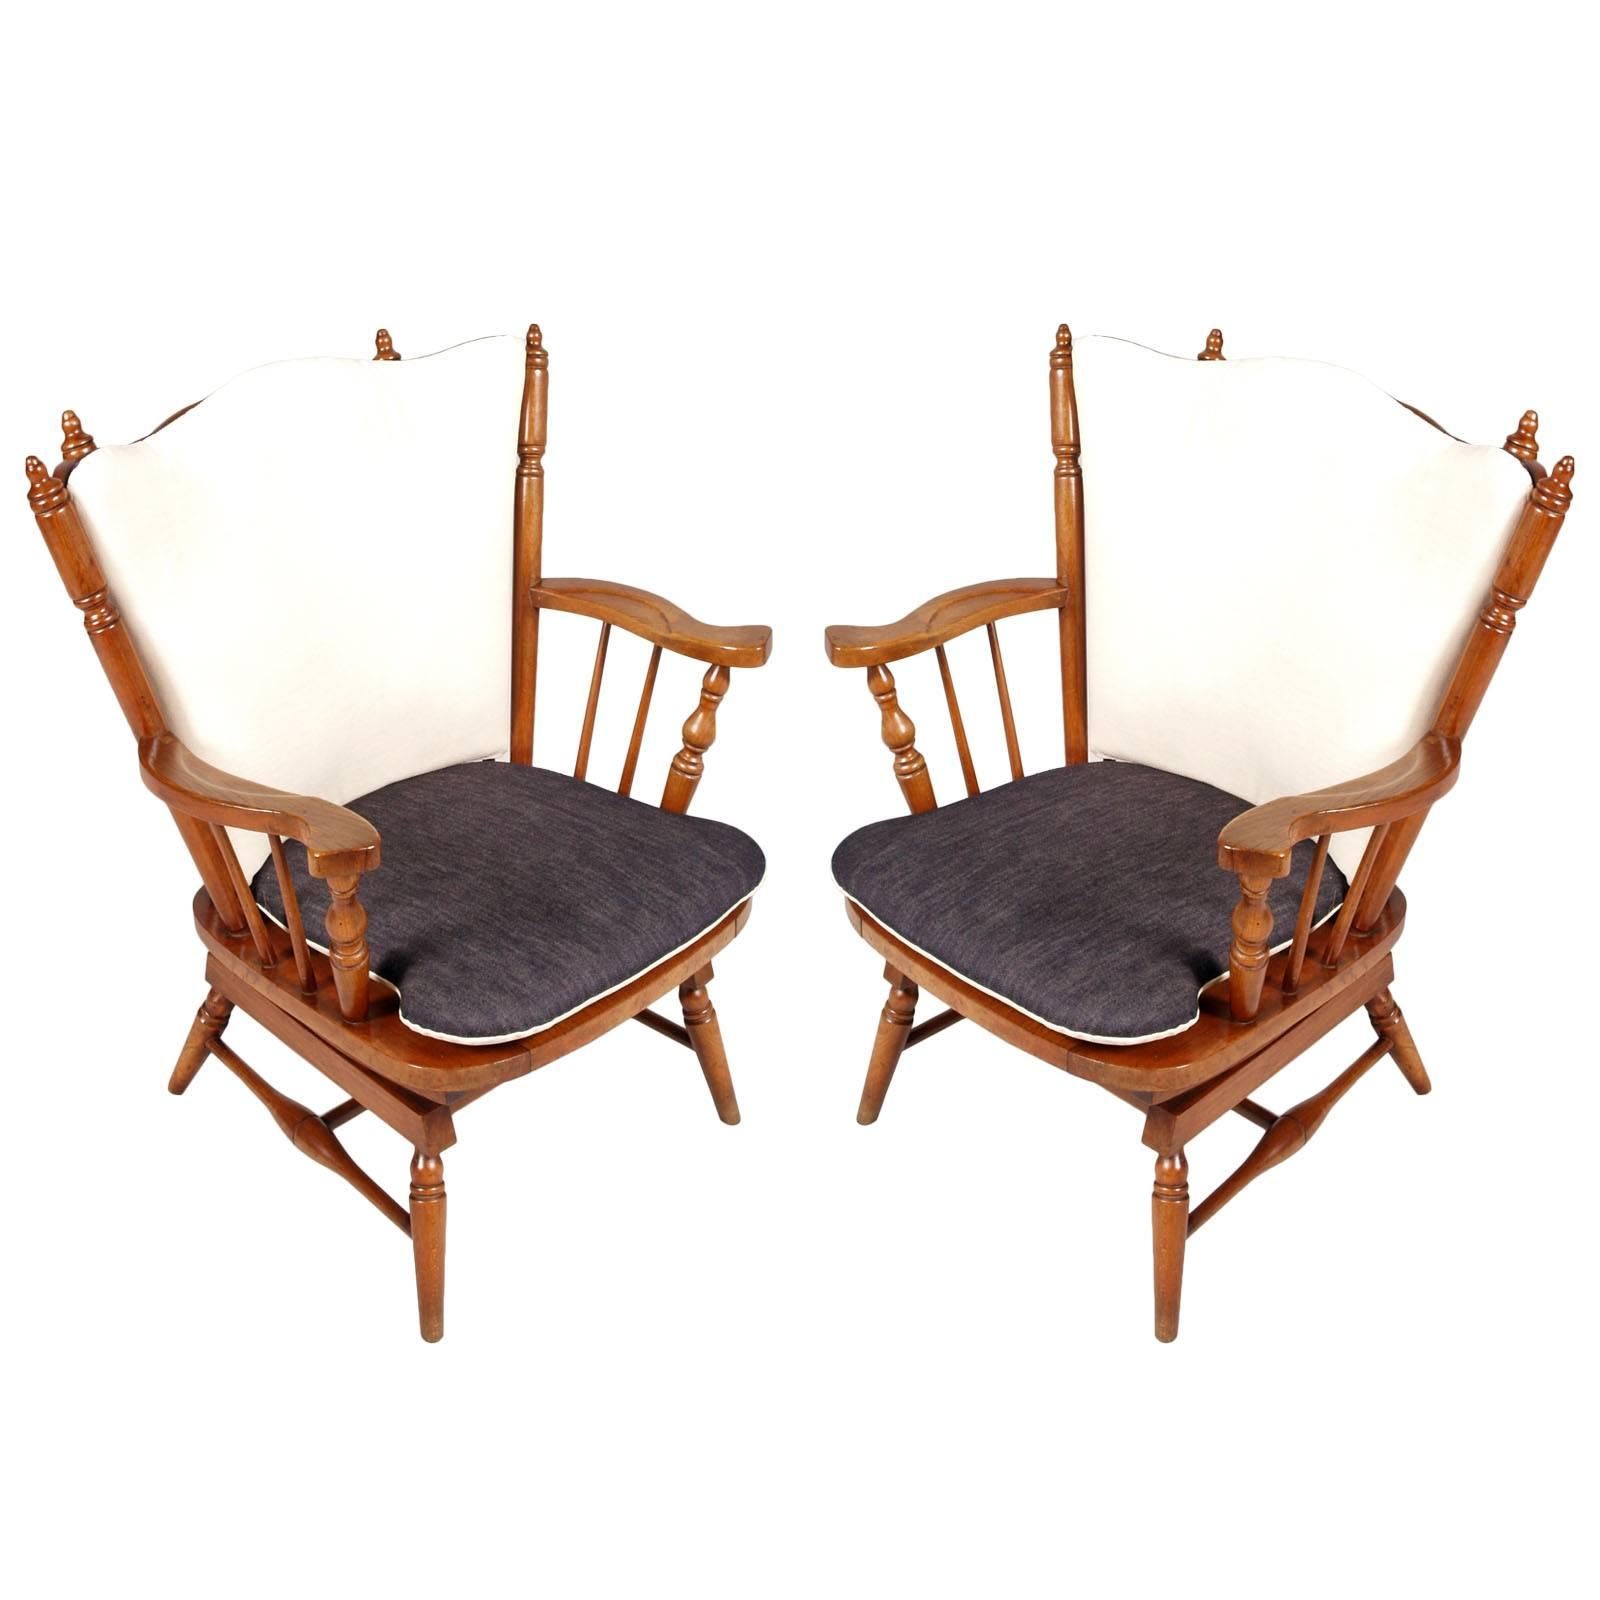 1930s Pair of Chestnut Chiavari Rocking Chairs with Springs, old America style For Sale